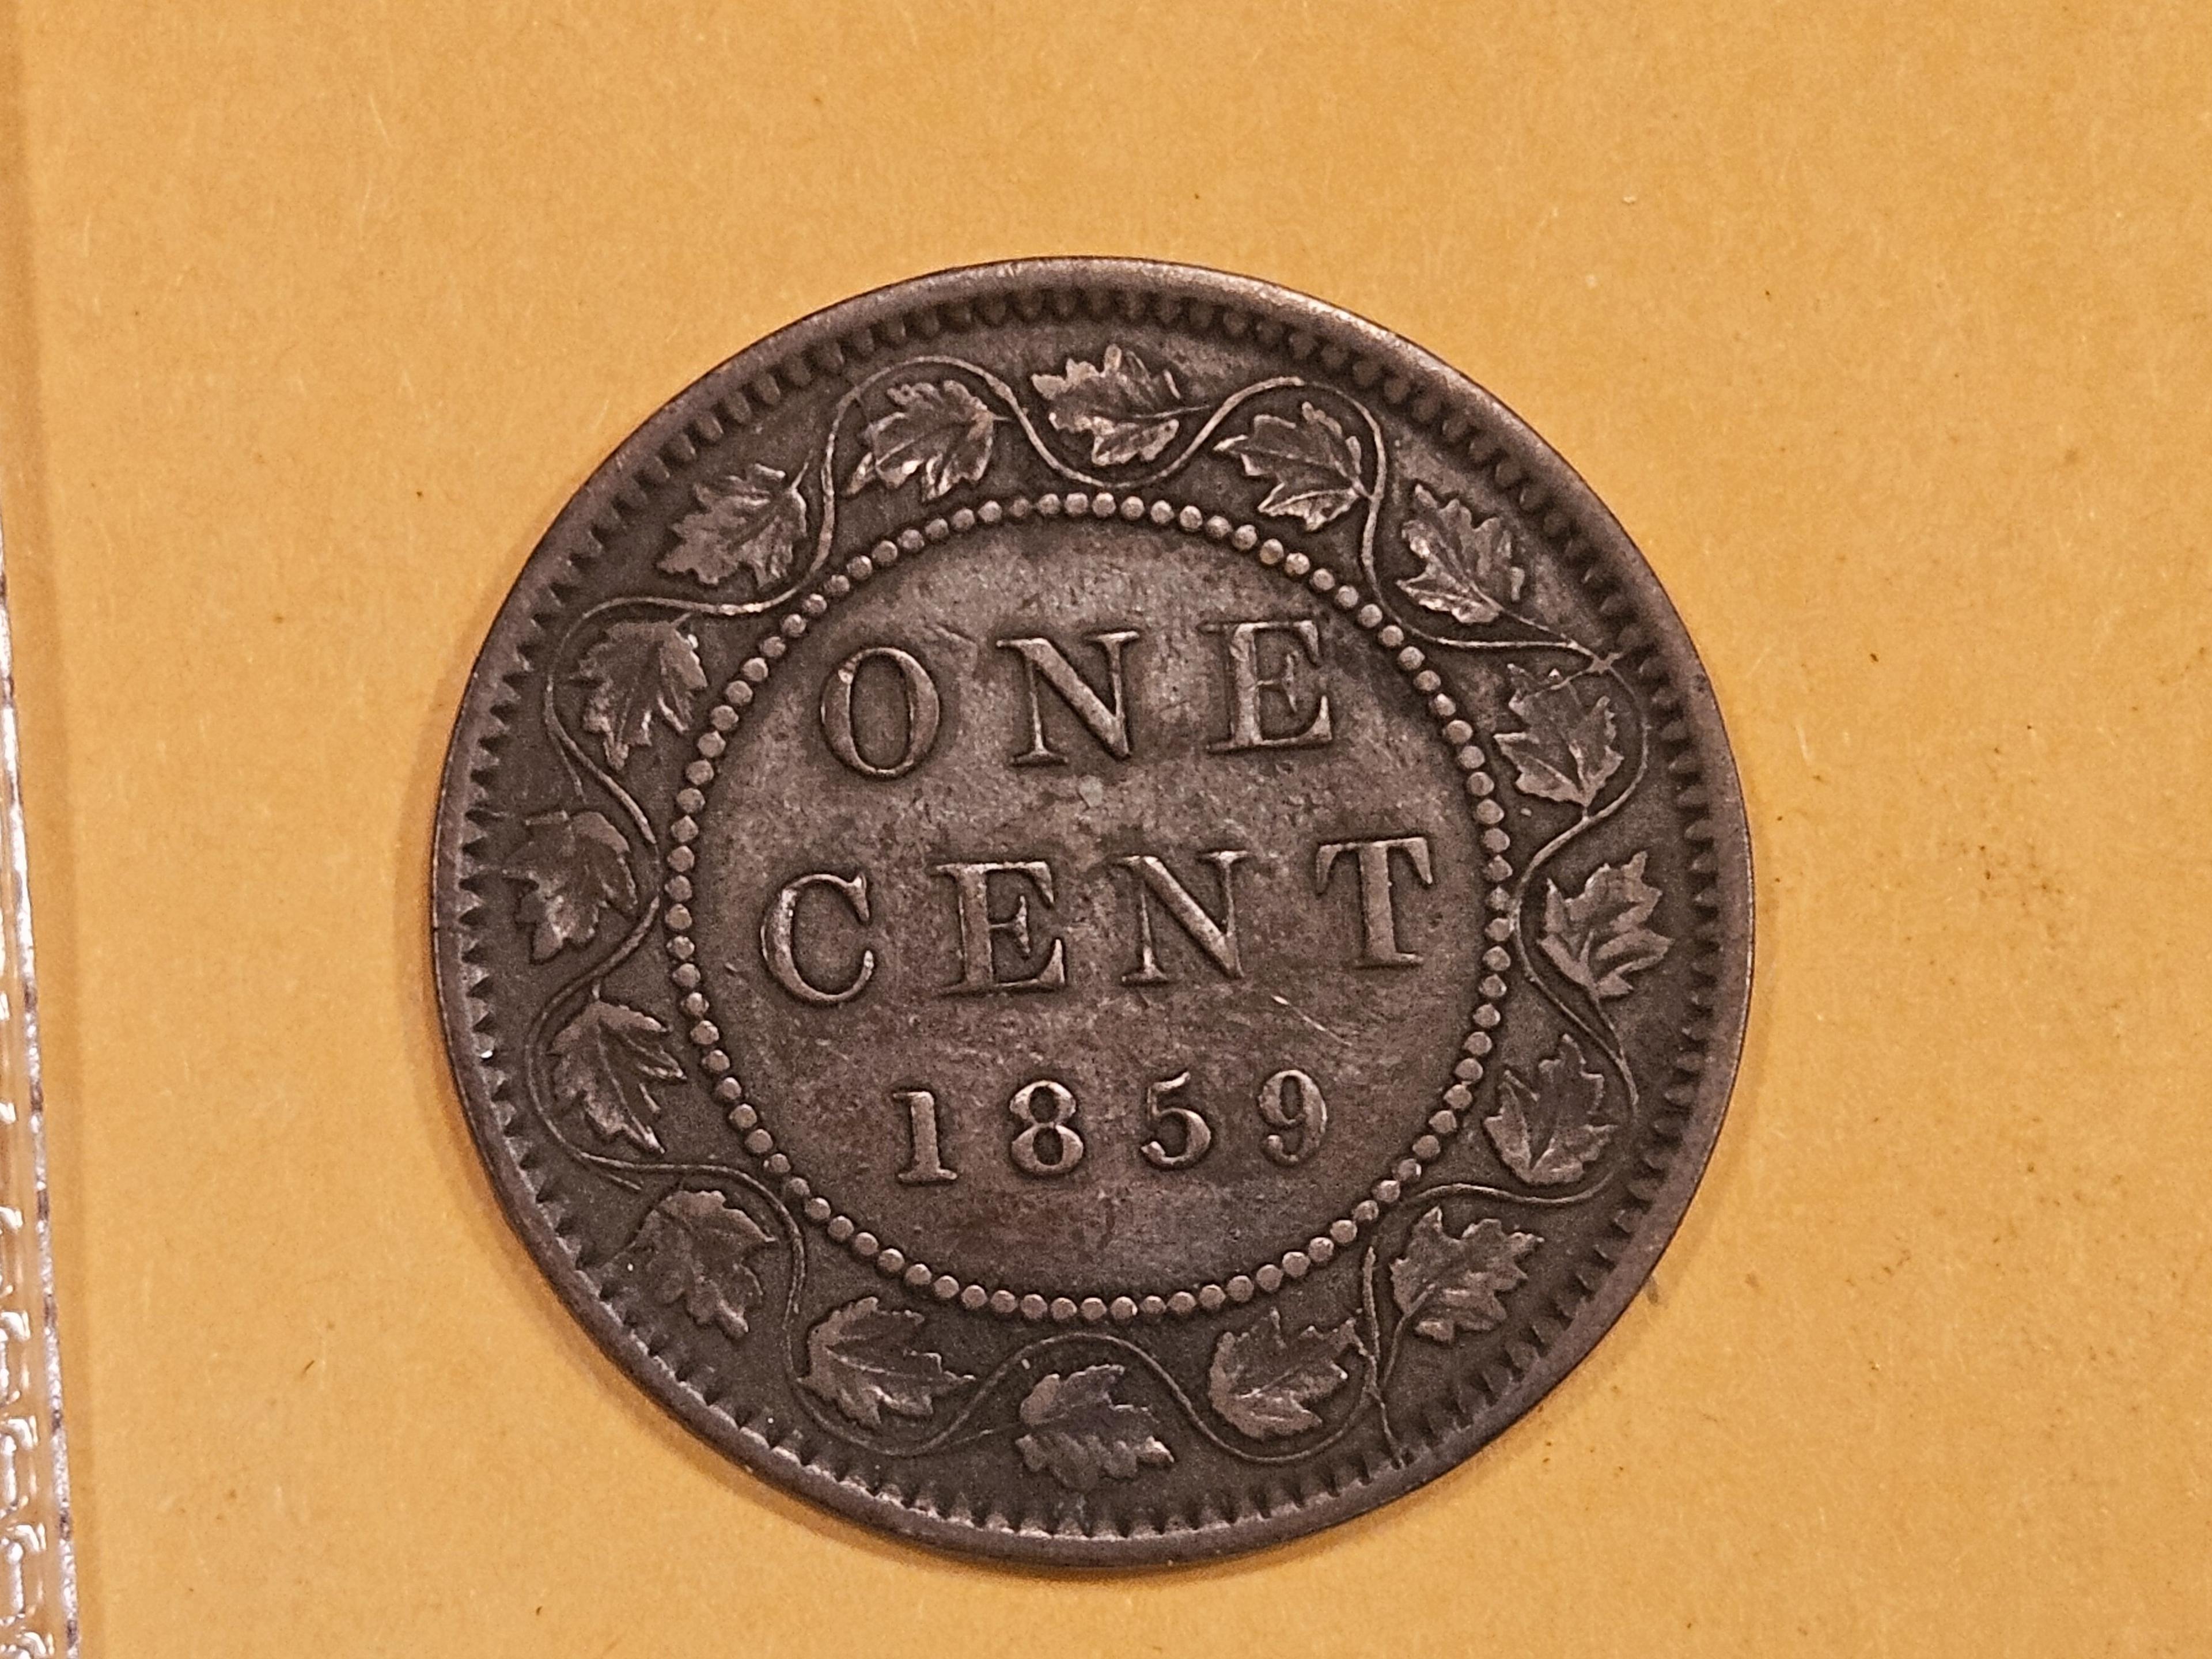 Key 1859 Canada large cent in Very Fine plus